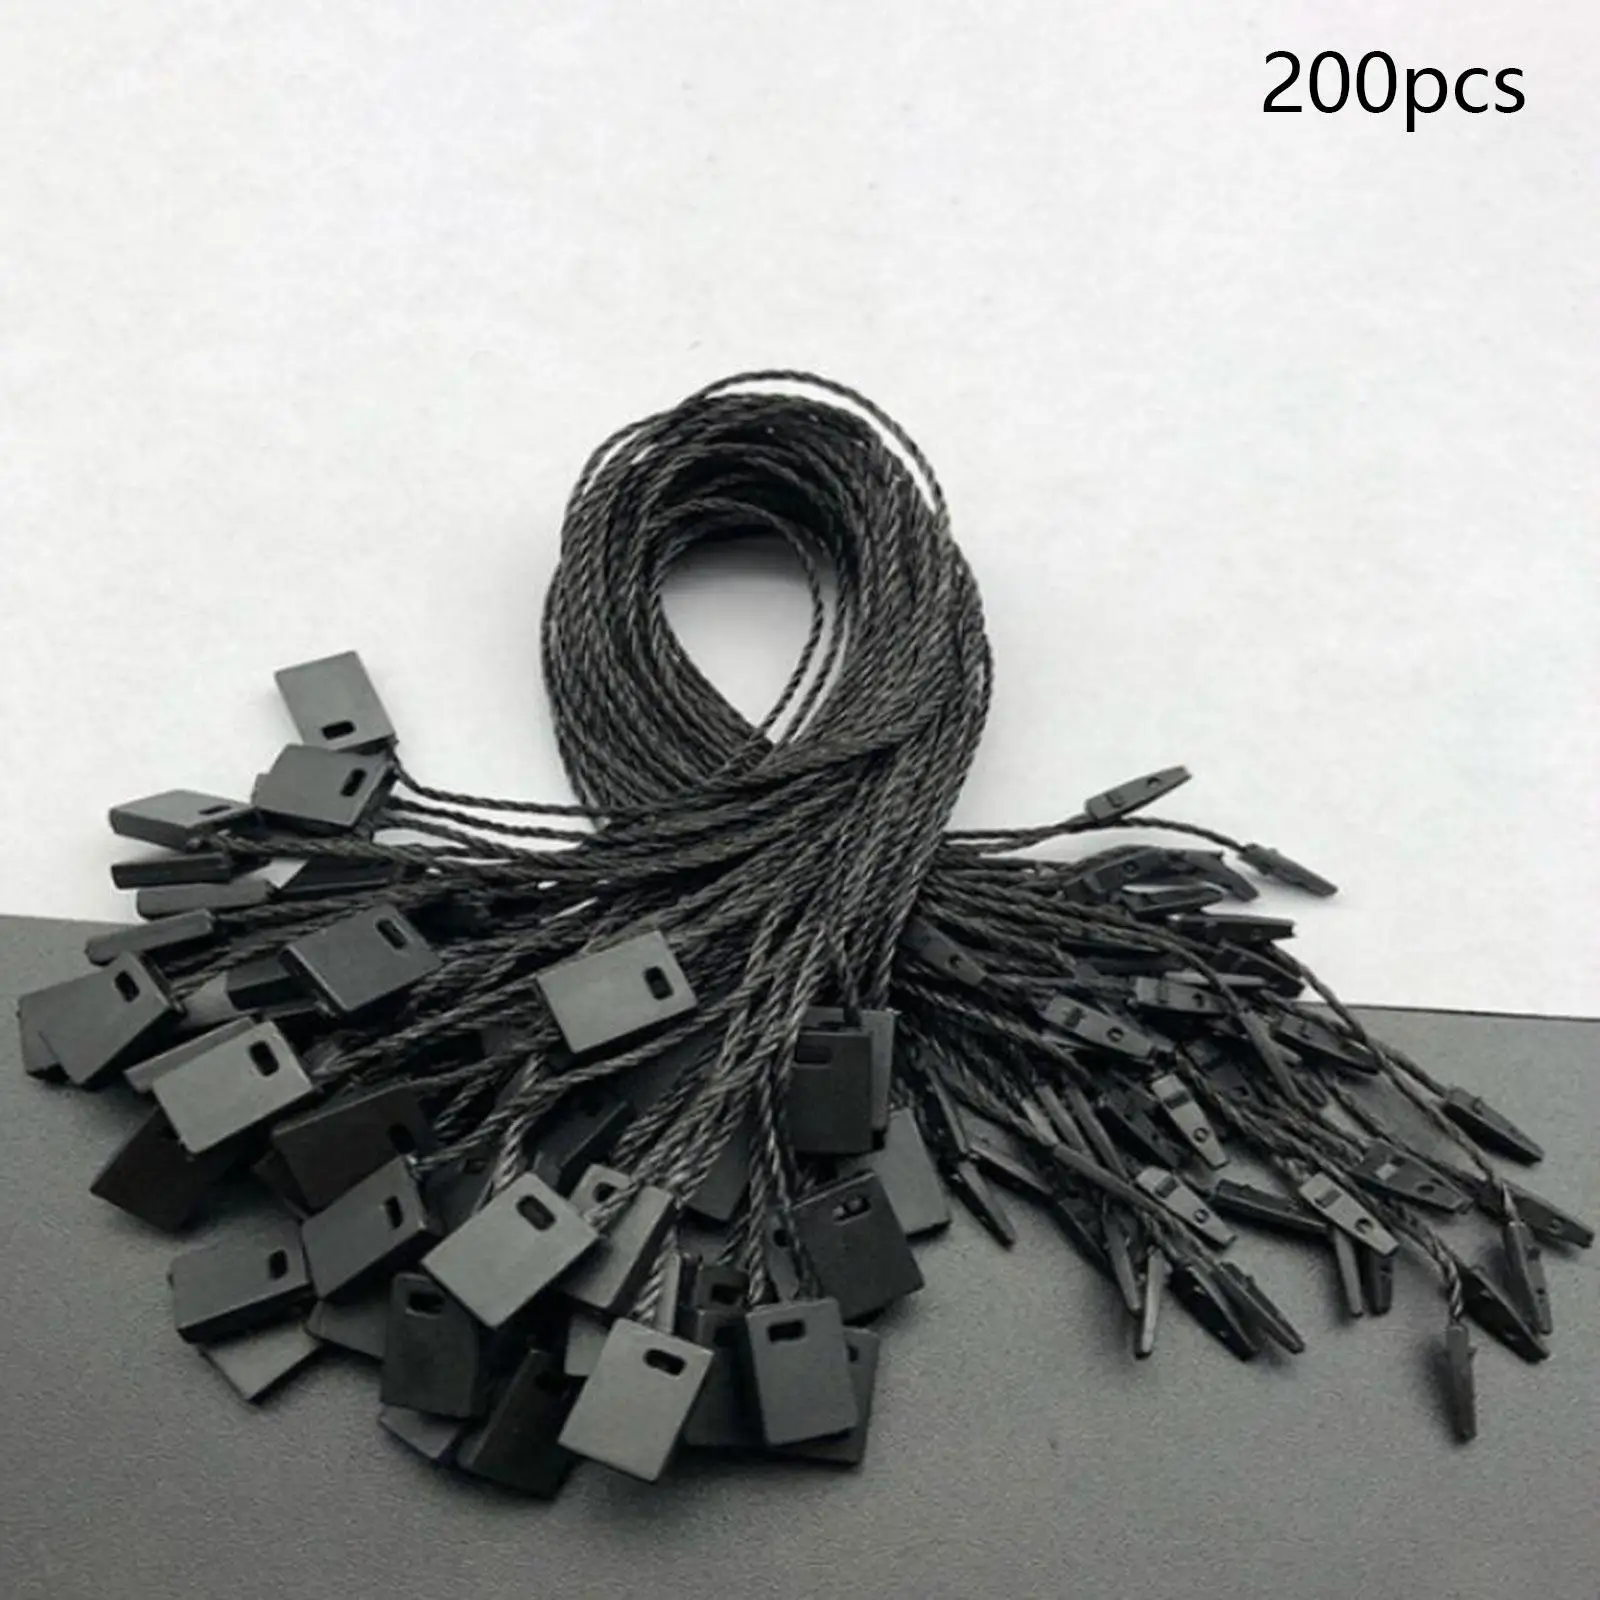 200x Hang Tag Strings Snap Lock Lightweight Fast to Attach Durable Portable Fastener Ties for Gift Tags Toys Belt Luggage Shoes